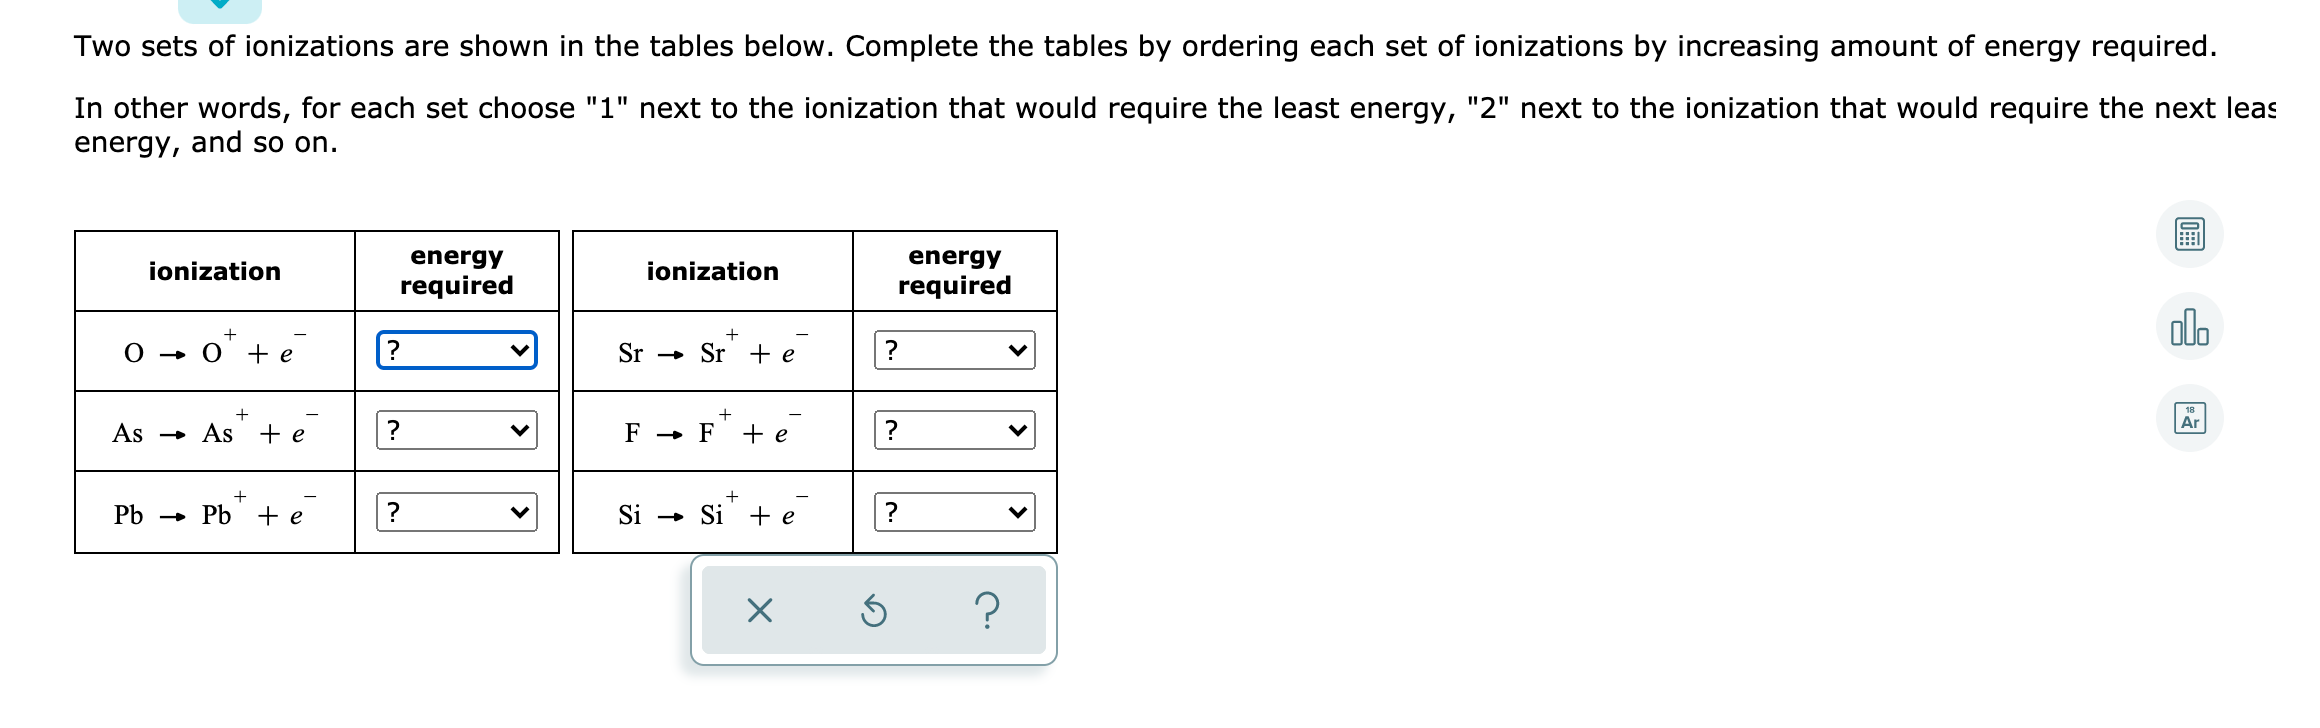 Two sets of ionizations are shown in the tables below. Complete the tables by ordering each set of ionizations by increasing amount of energy required.
In other words, for each set choose "1" next to the ionization that would require the least energy, "2" next to the ionization that would require the next leas
energy, and so on.
energy
energy
ionization
ionization
required
required
alo
0 - o" + e
Sr - Sr + e_
?
Ar
As → As + e
F → F
+ e
?
Pb → Pb +e
Si - Si + e
?
>
